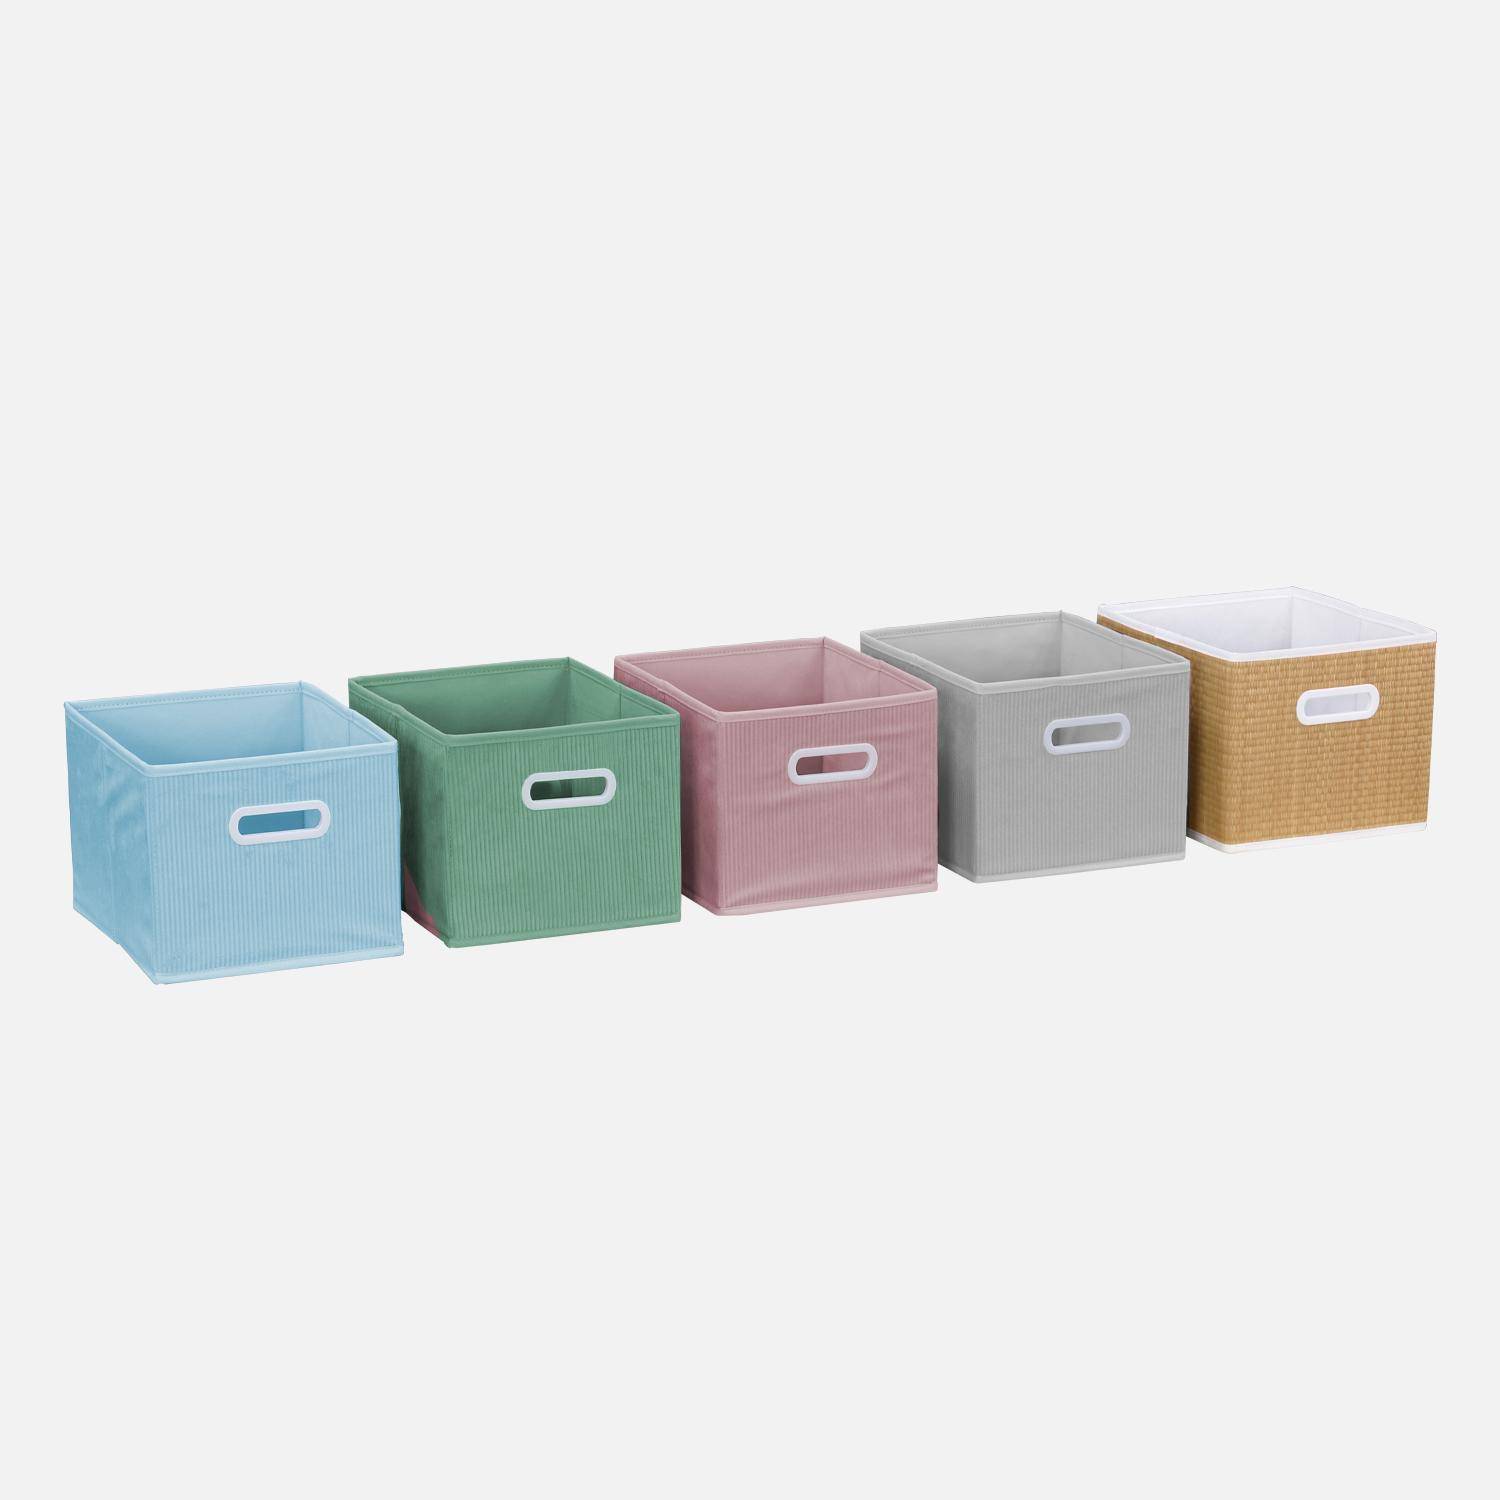 Storage unit for children with 7 compartments and 2 pink and 2 grey velvet baskets,sweeek,Photo4